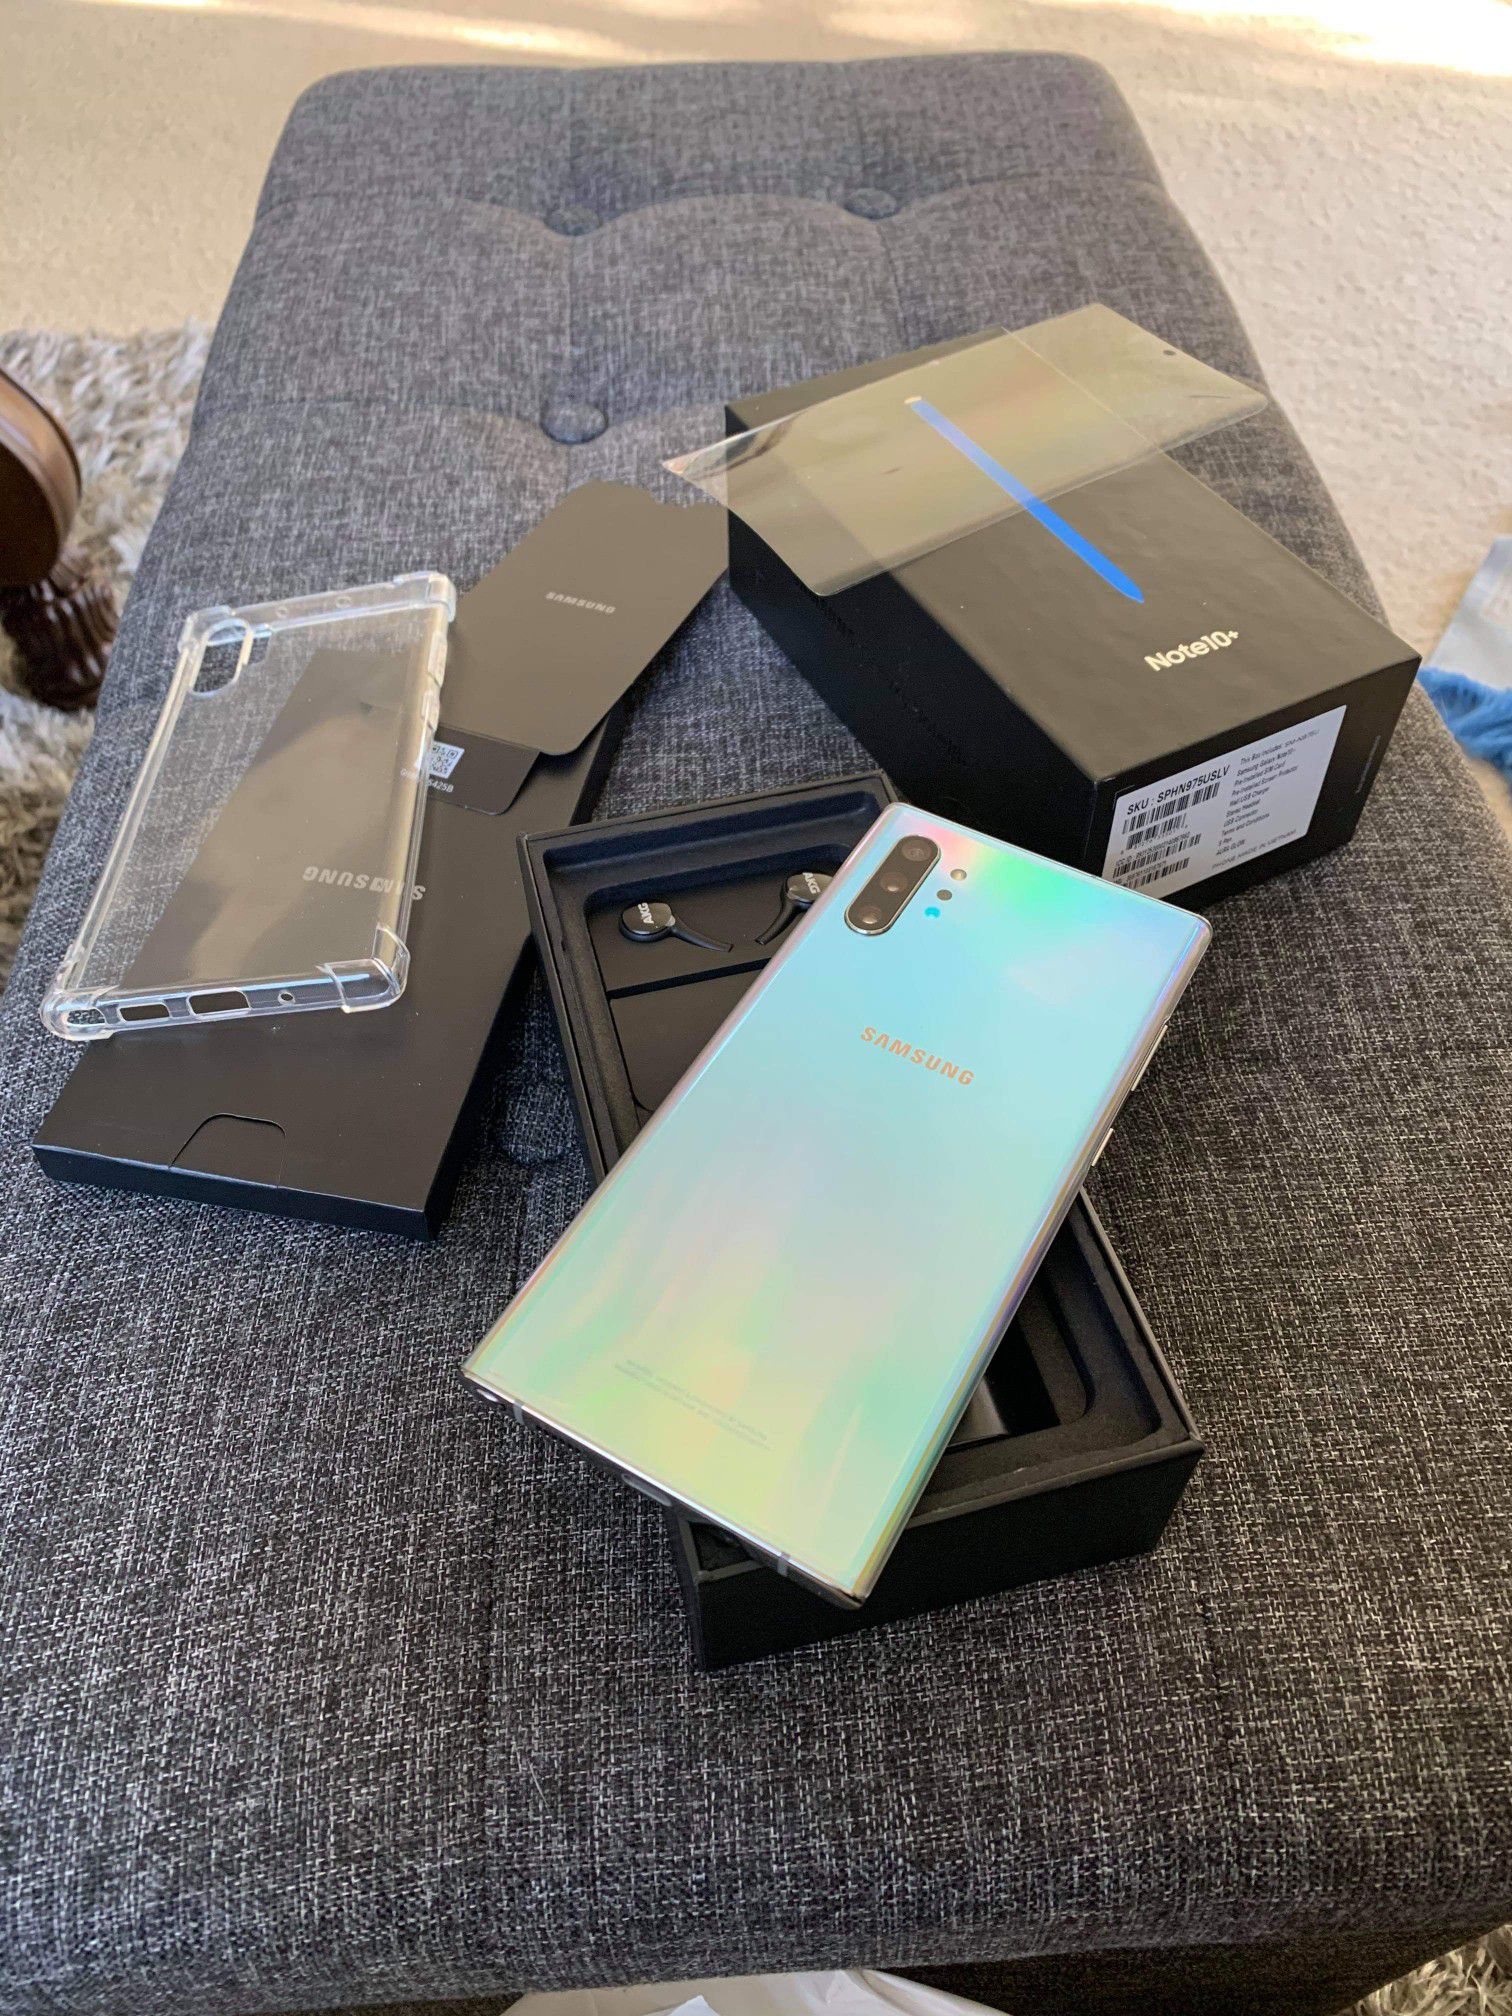 Samsung Galaxy note 10+ for Sprint 256gb like brand new open box case screen protector no chipping no delivery no trade